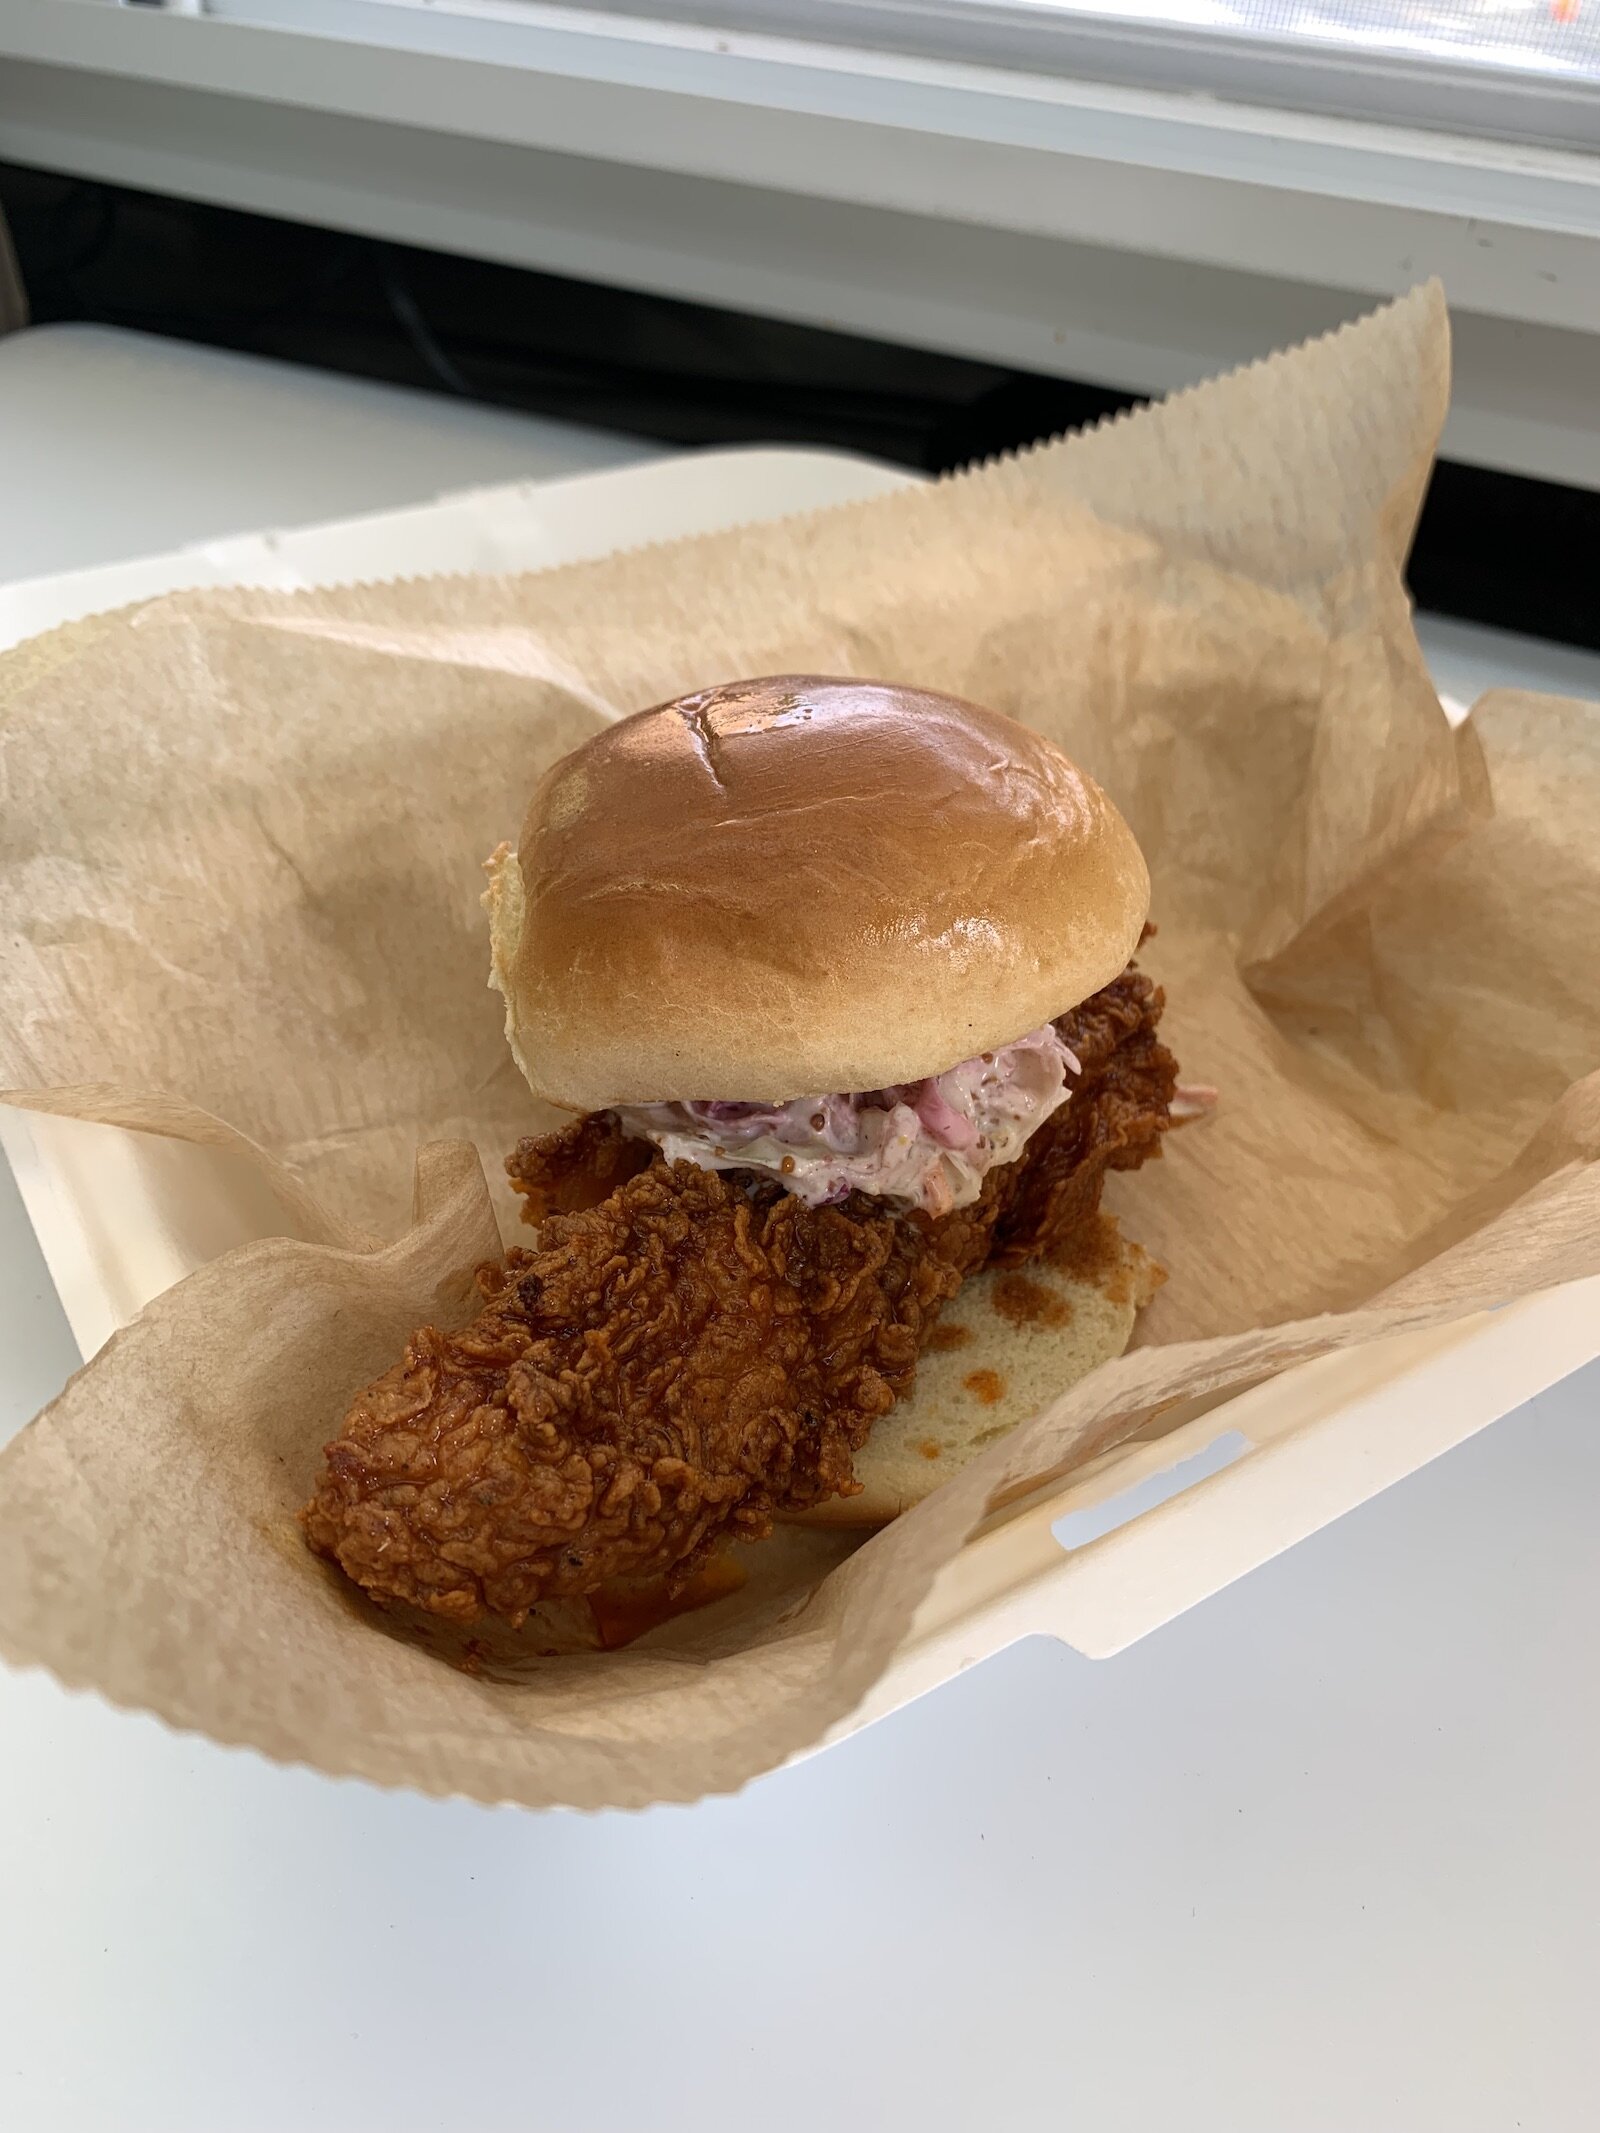 A slider from the Spicy Bird.